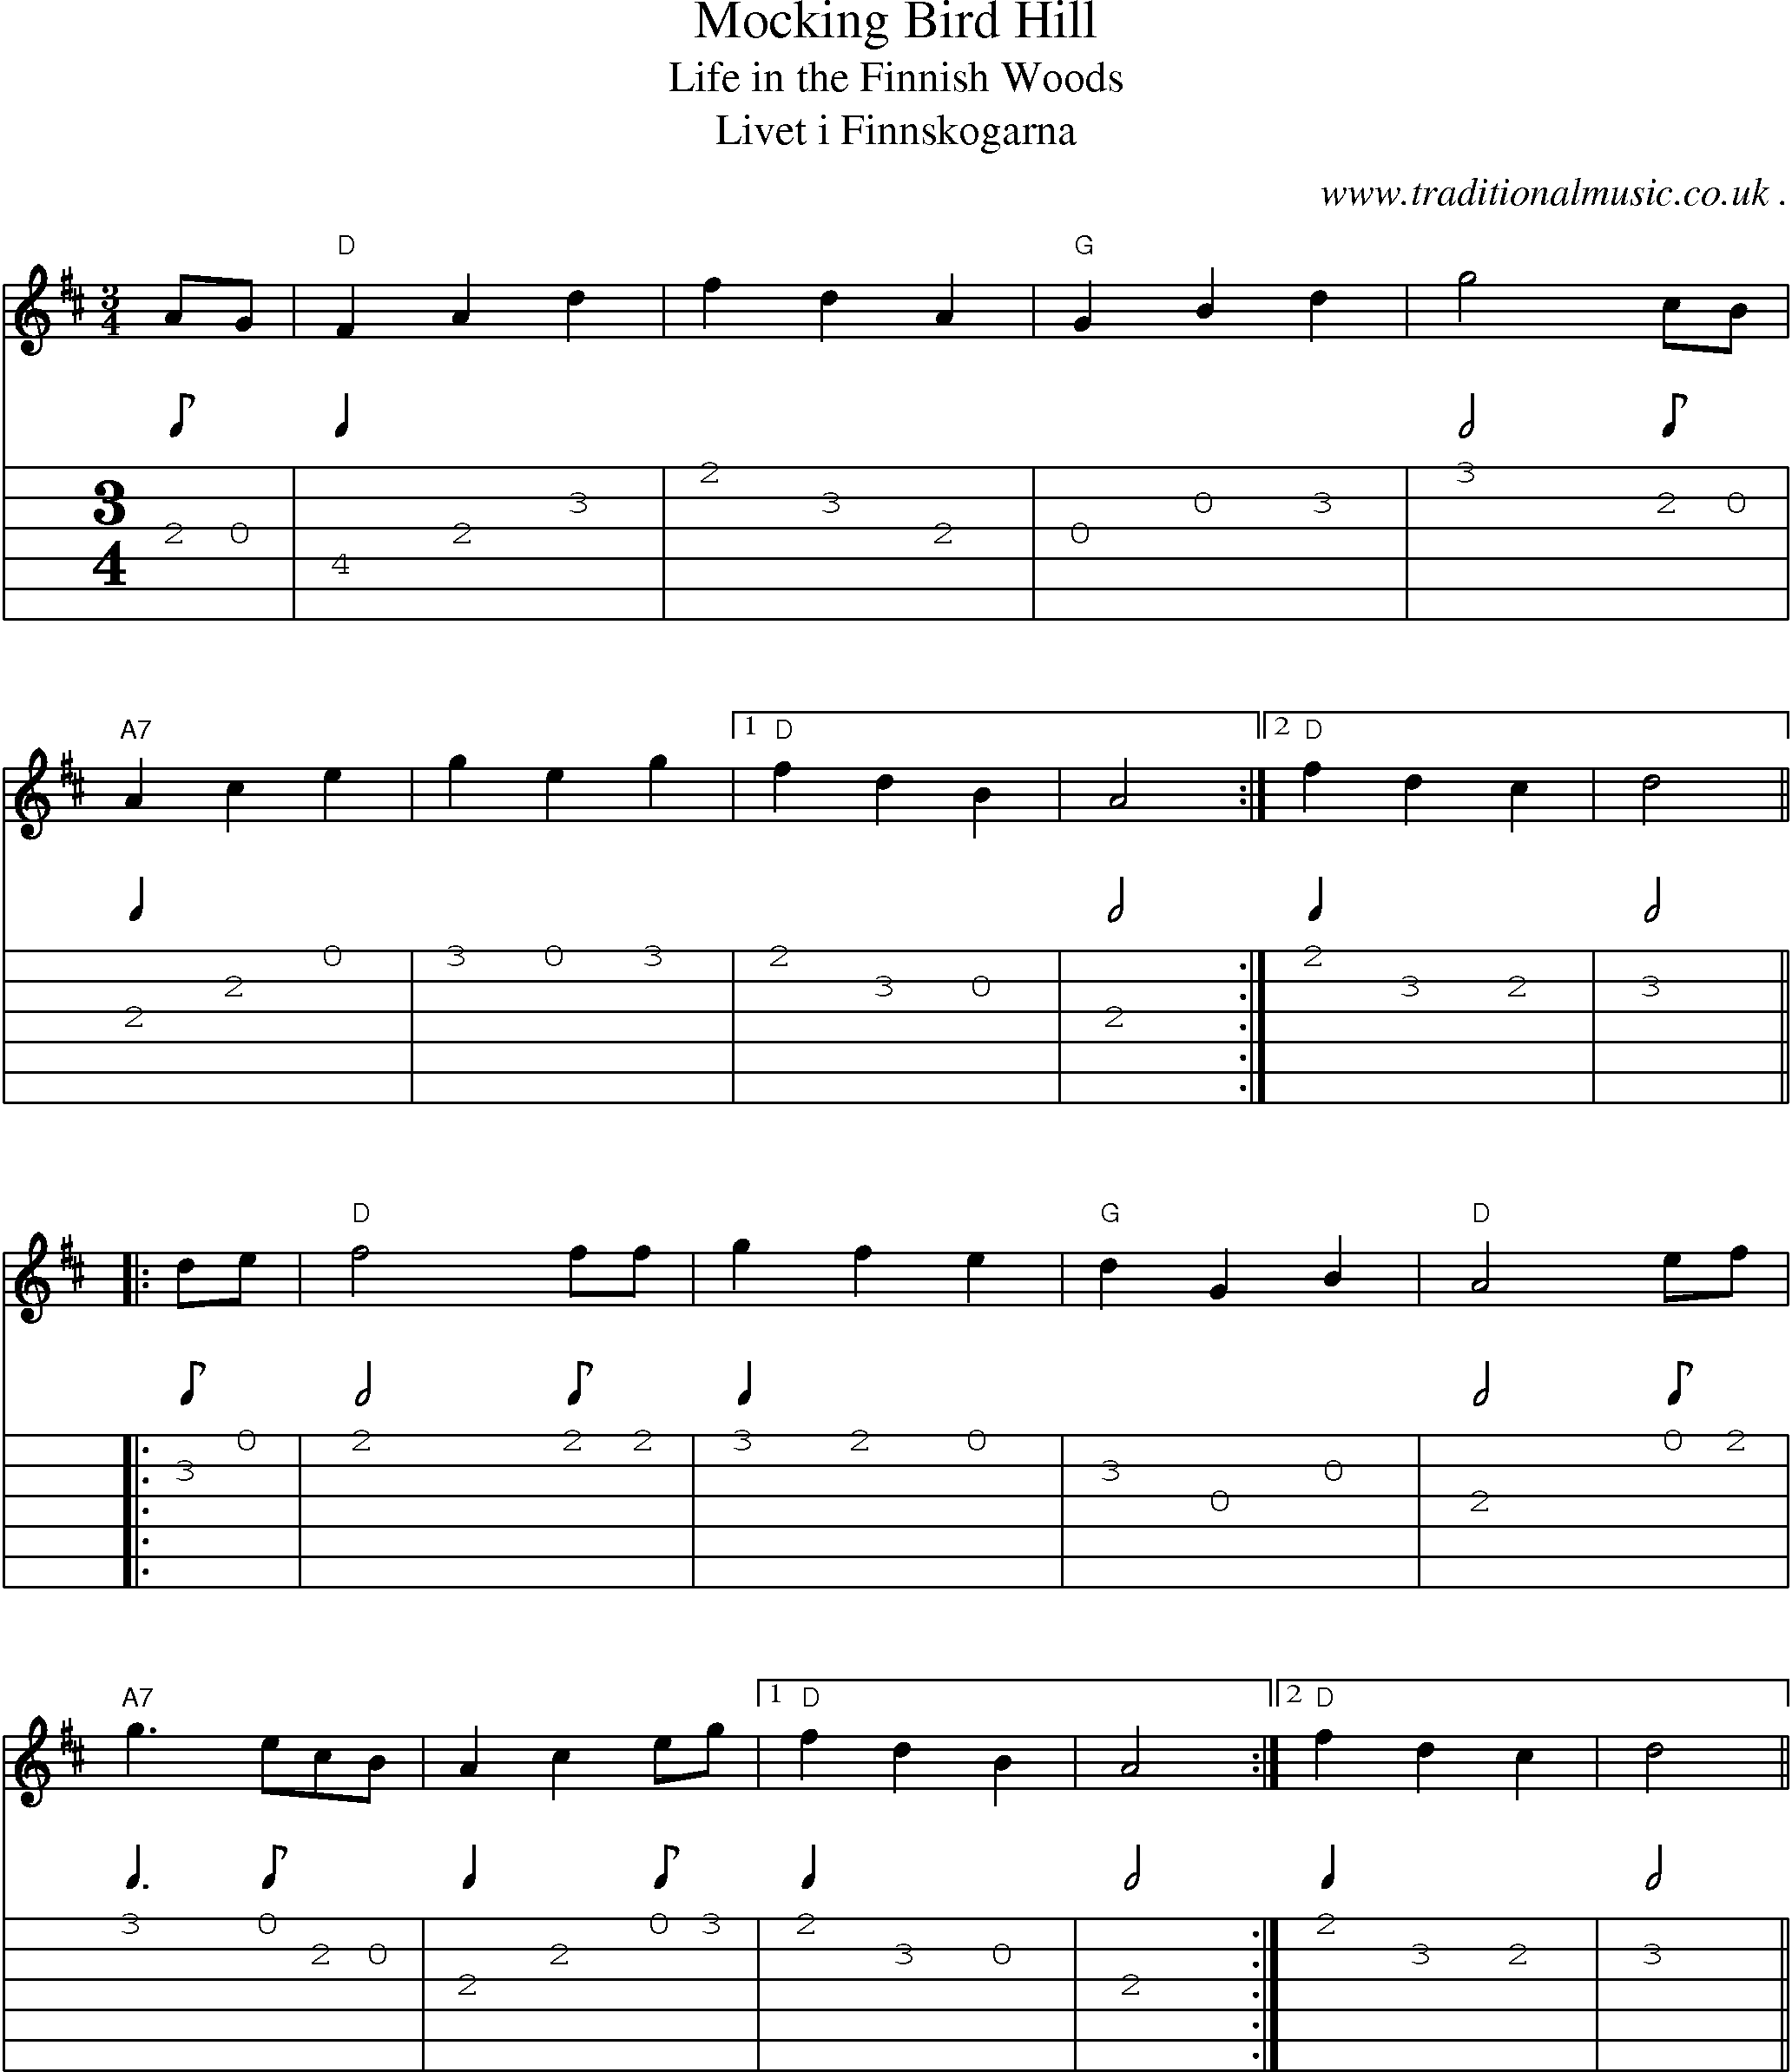 Sheet-Music and Guitar Tabs for Mocking Bird Hill